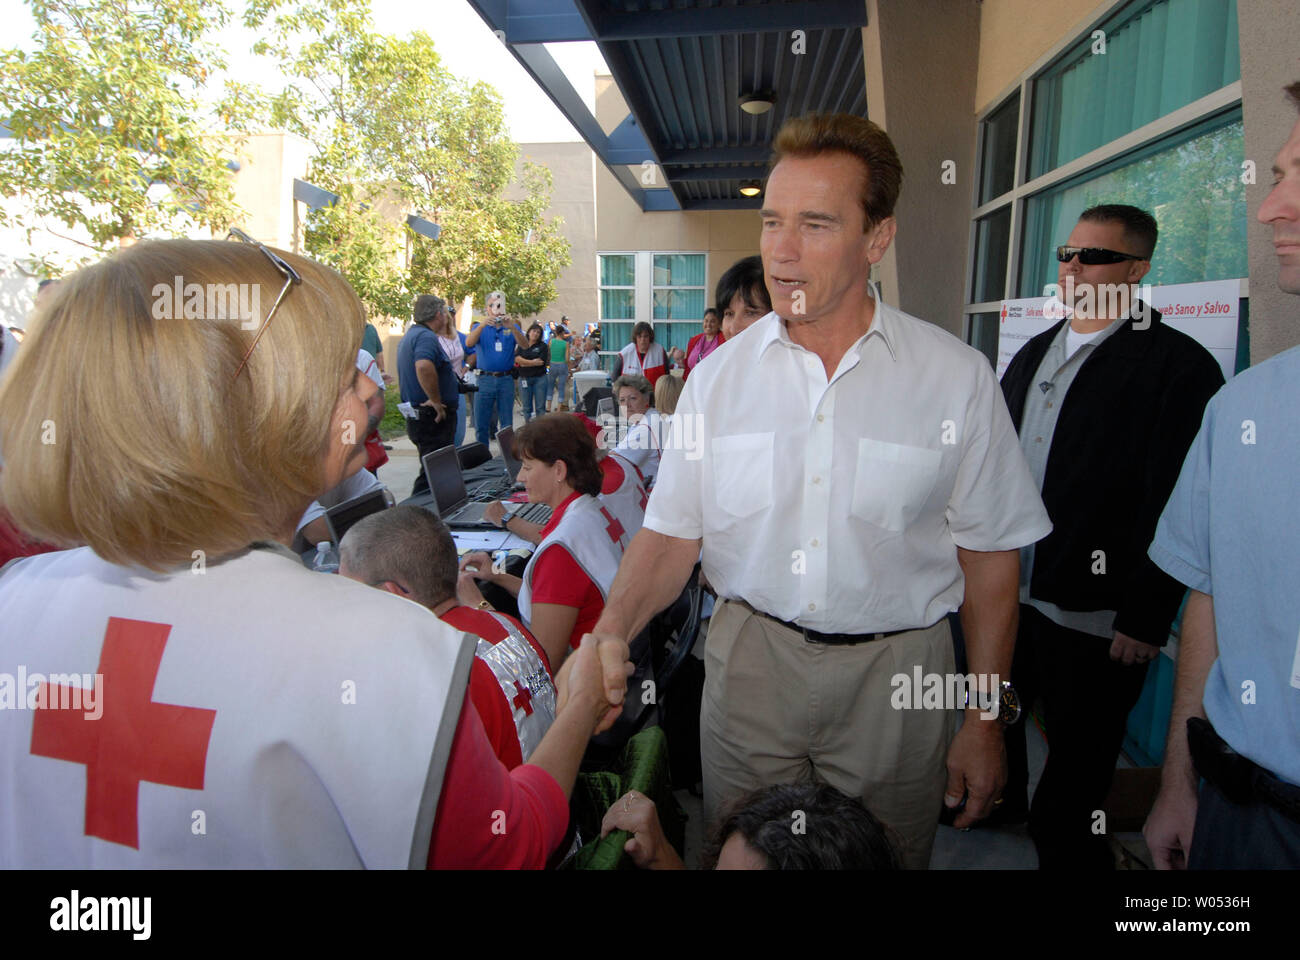 California Governor Arnold Schwarzenegger speaks with and thanks Red Cross workers at a Assistance Center set up in Rancho San Diego, California on October 28, 2007. The center was set up to help victims of the the Harris wildfire which killed 5 people, forced thousands to evacuate and destroyed hundreds of homes.  (UPI Photo/Earl Cryer). Stock Photo